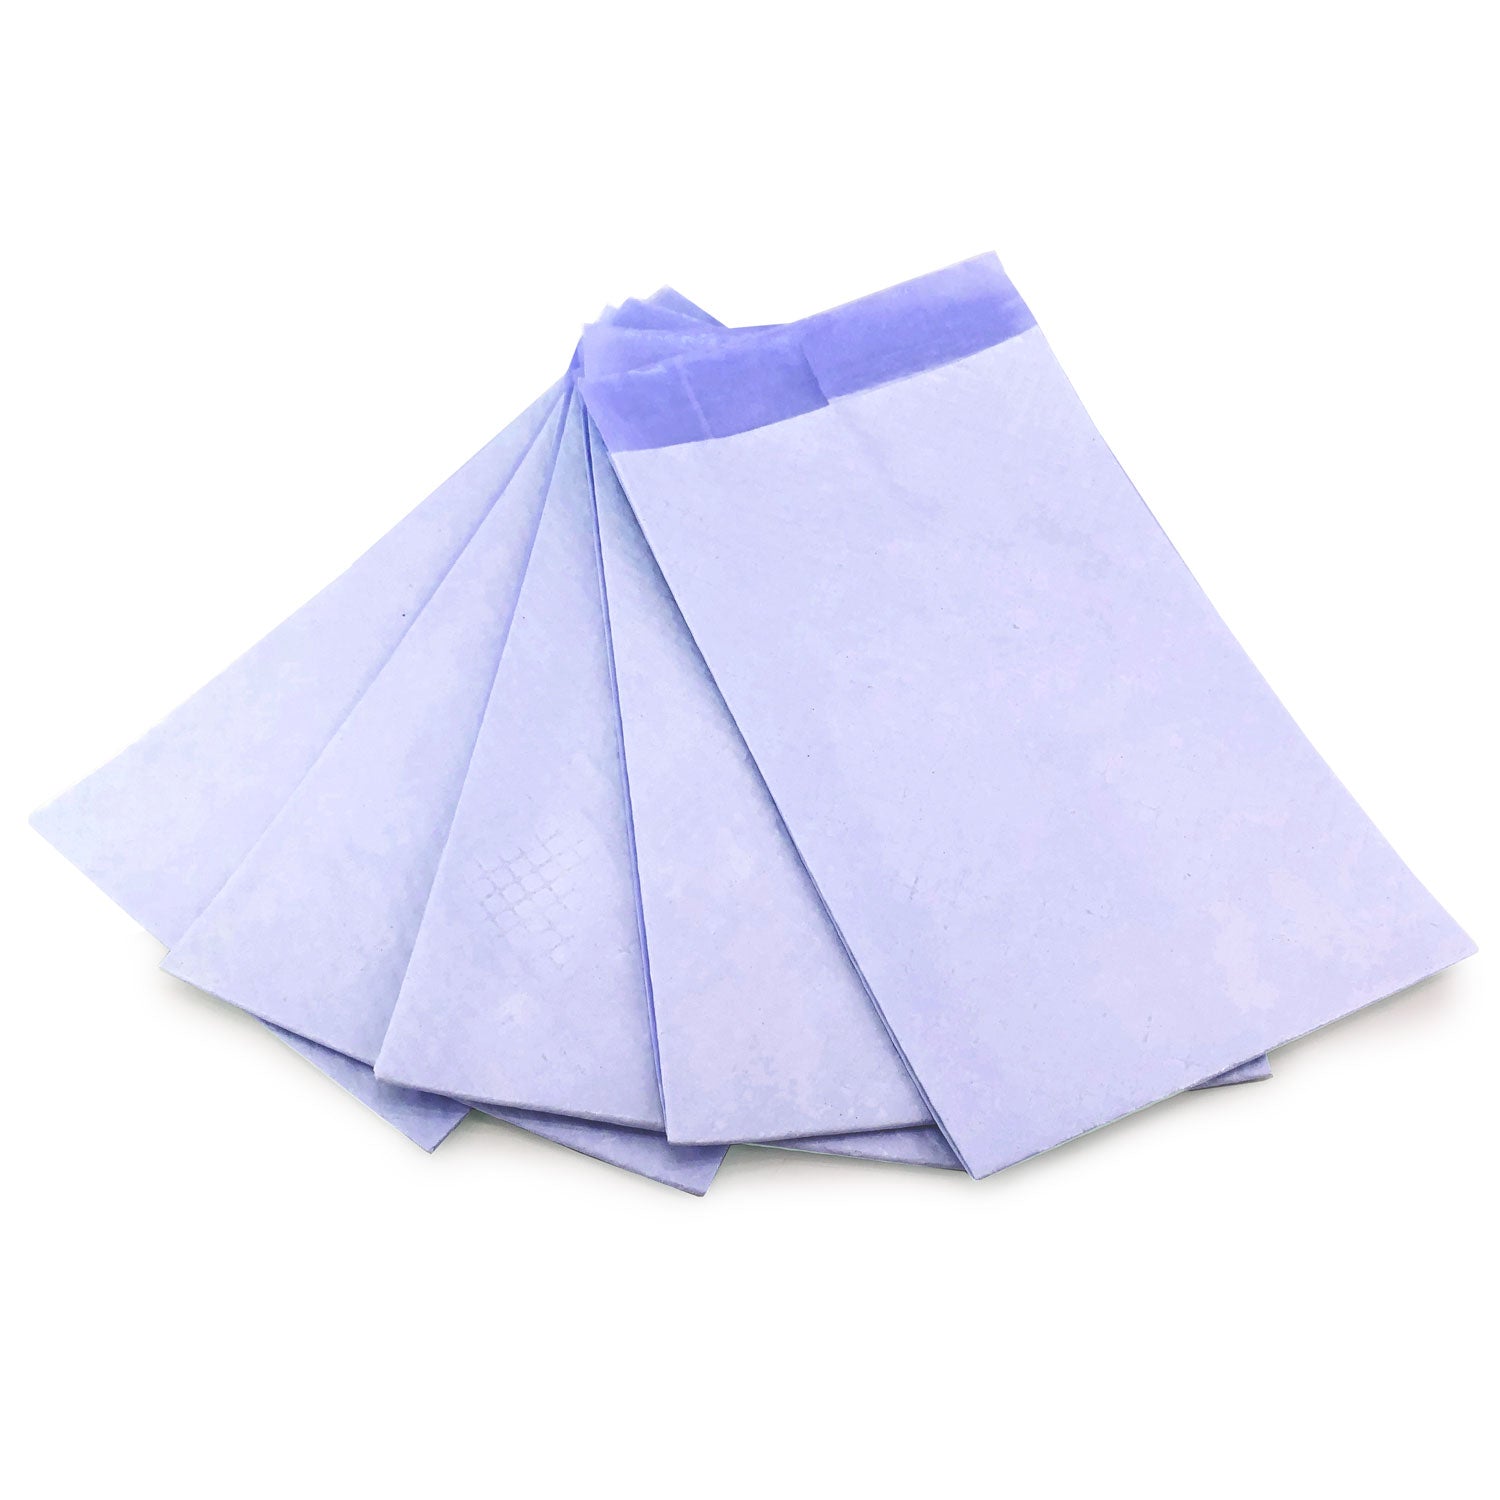 NEW- ValuePad Plus Puppy Pads, Extra Large 28"x36", Lavender Scent, 400 ct WHOLESALE PACK